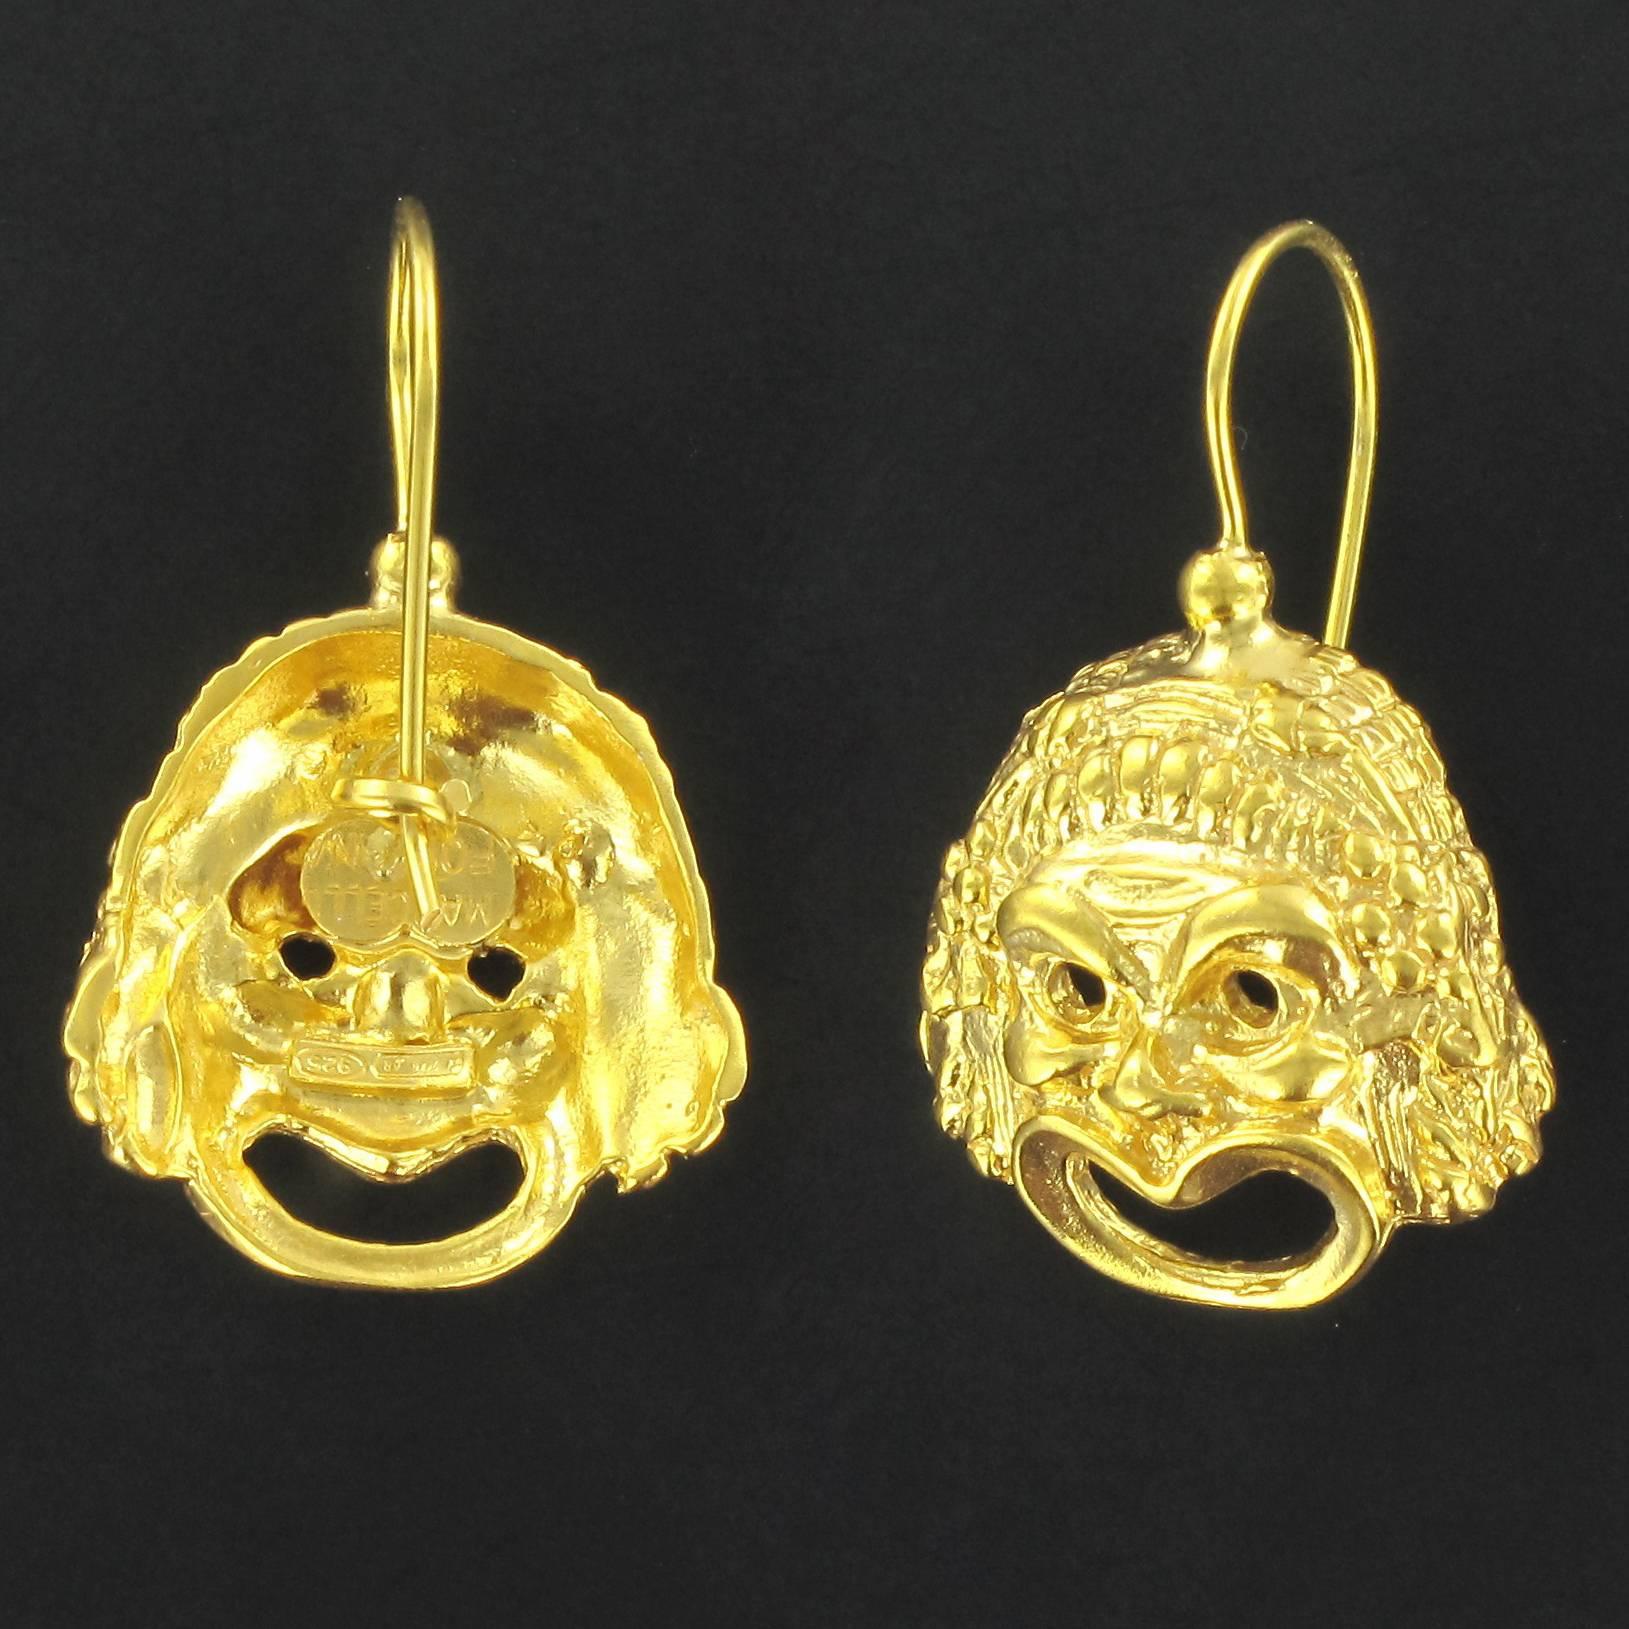 For pierced ears.
Pair of earrings in vermeil, silver and yellow gold.
Earring earring, each is formed of a decoration representing a grimacing mask. The clasps are goosenecks with safety hooks. 
Overall length: 3,5 cm, width to the widest: 2,1 cm,